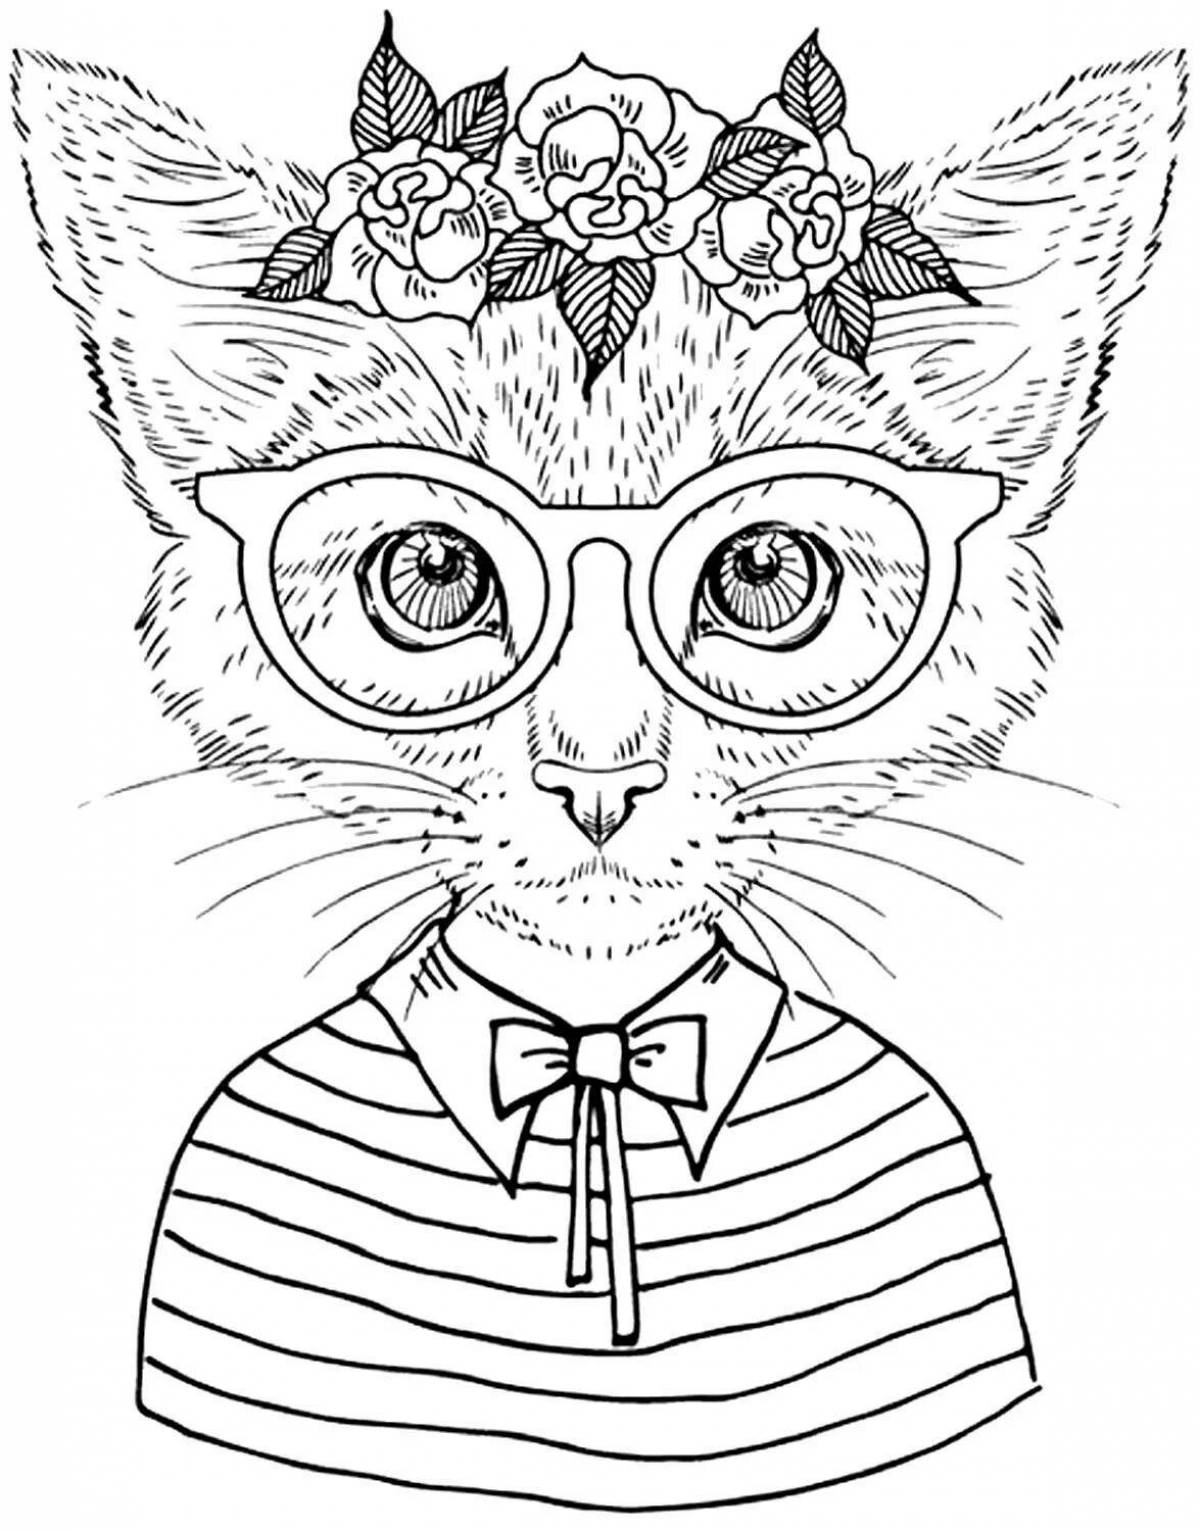 Coloring page vivacious letter eater antistress